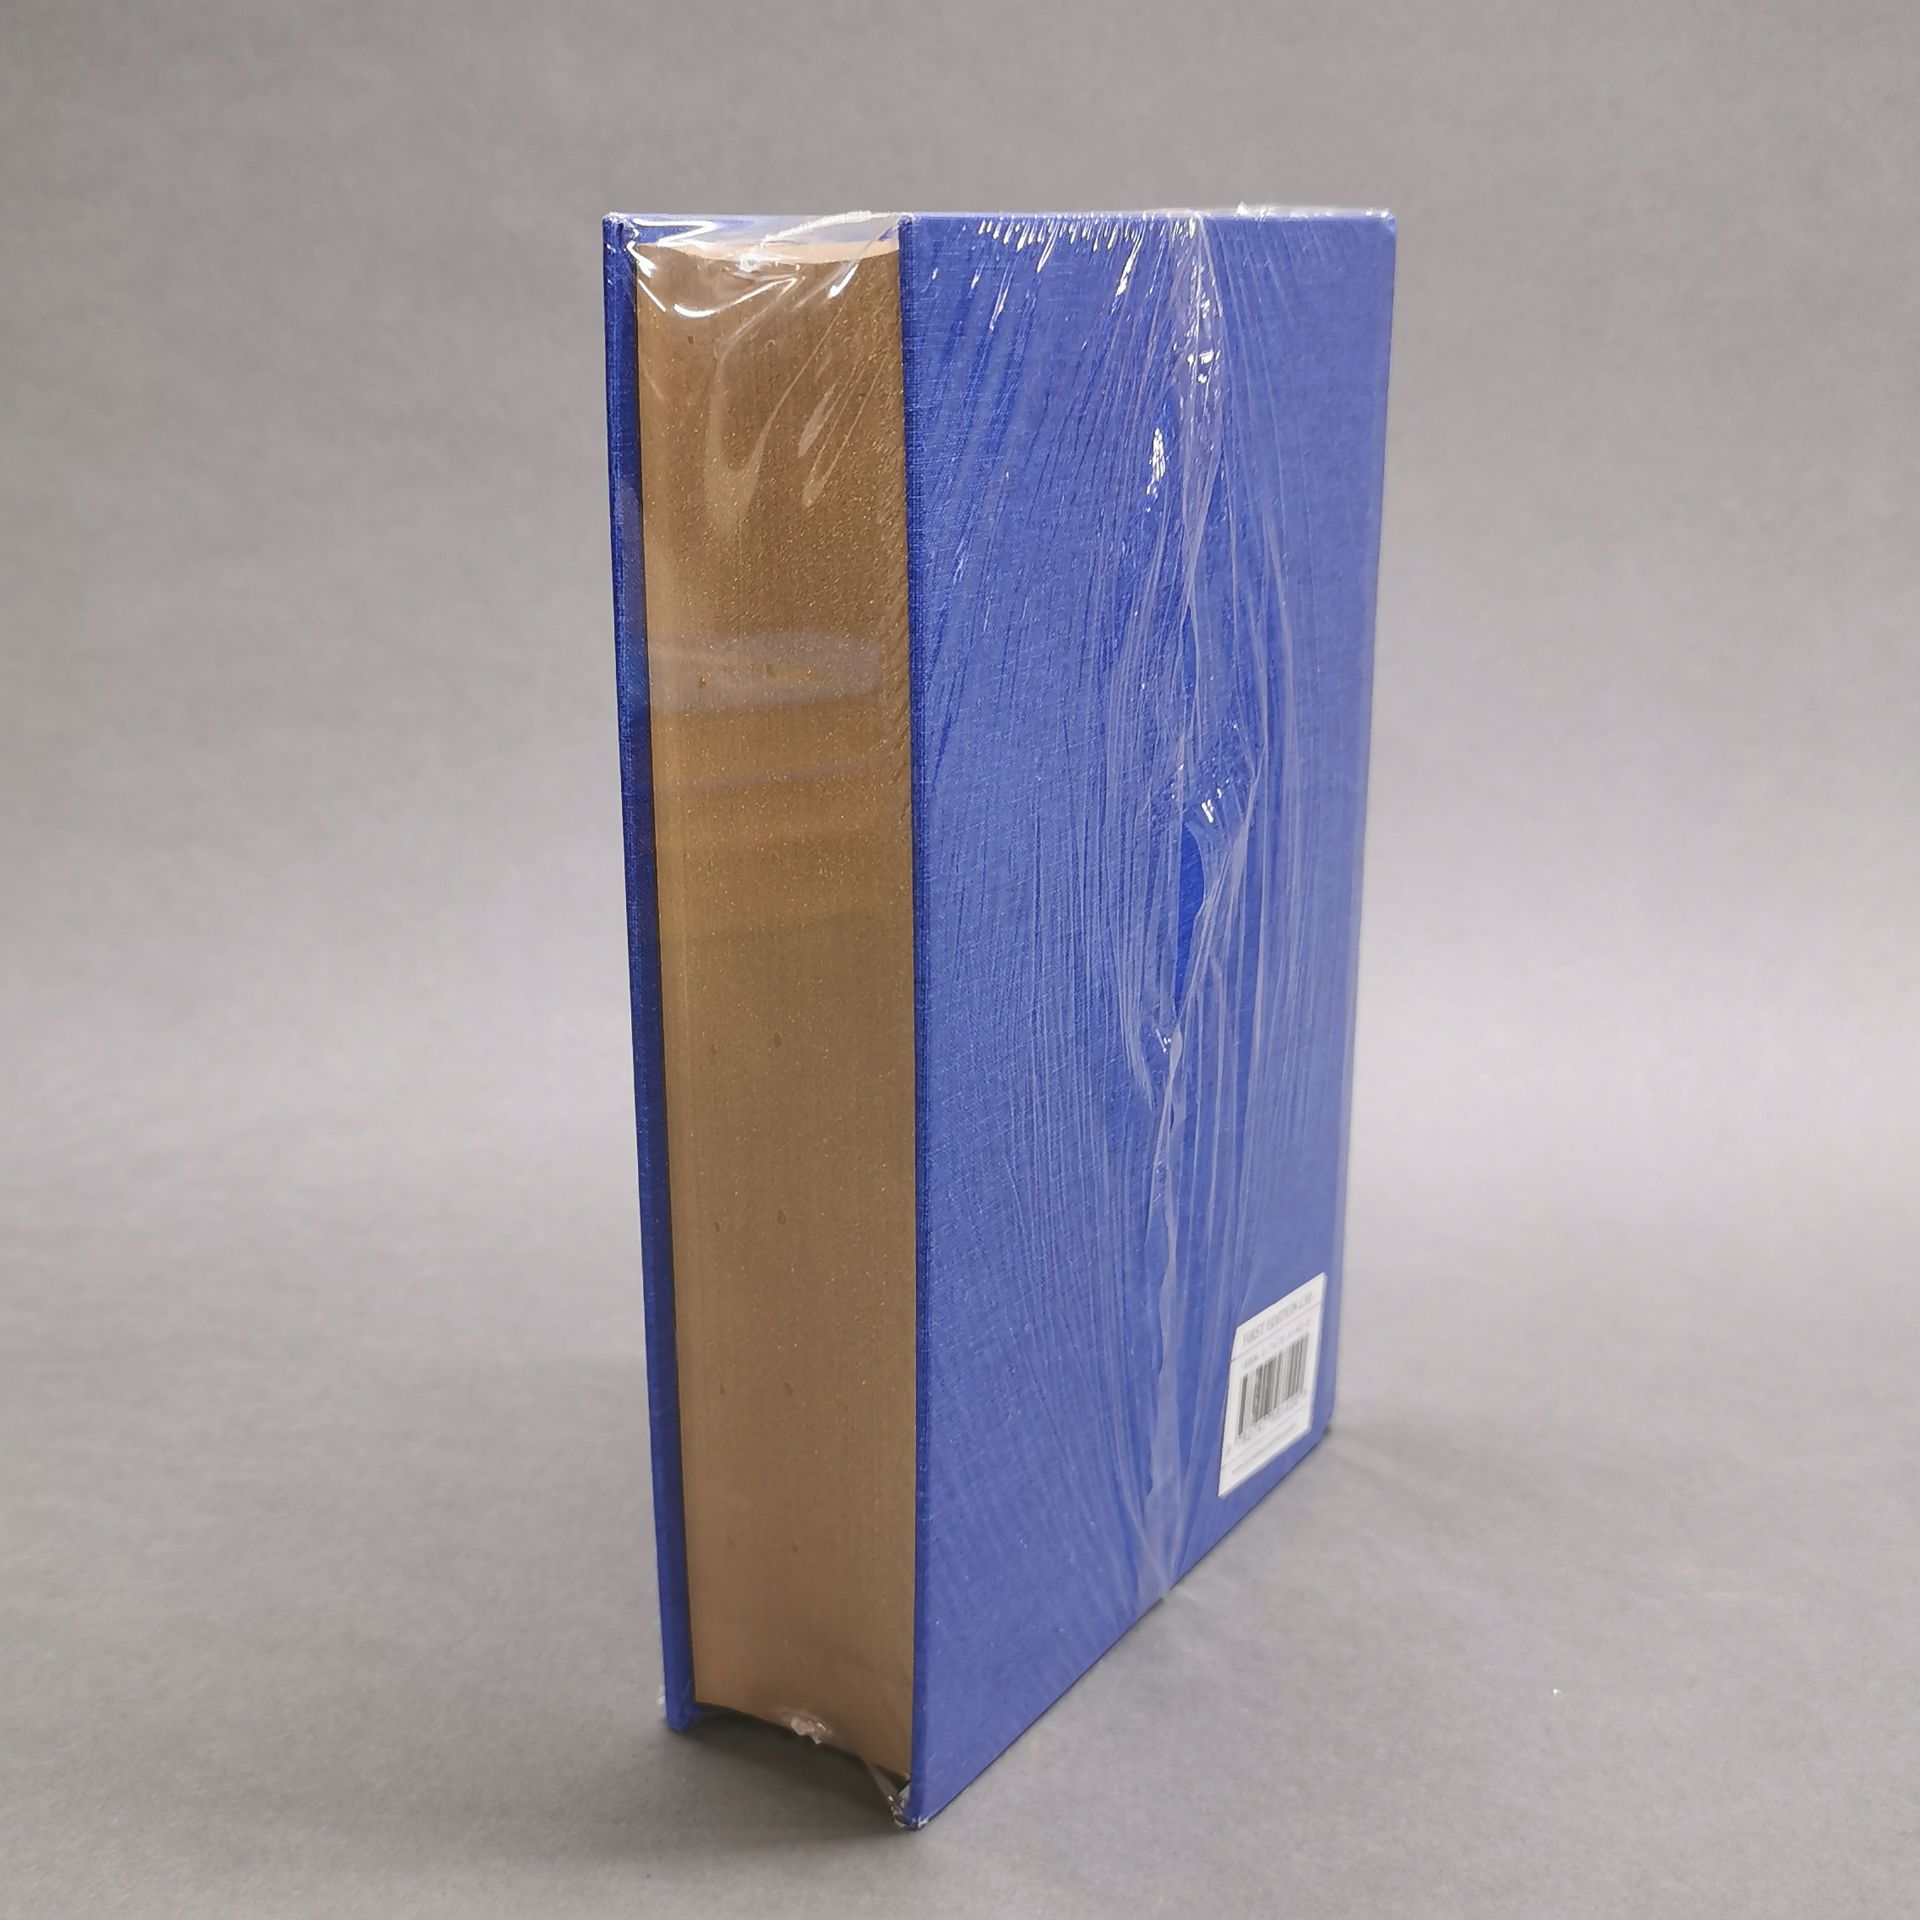 A first edition sealed hardback Harry Potter and the Half blood prince novel. - Image 2 of 3